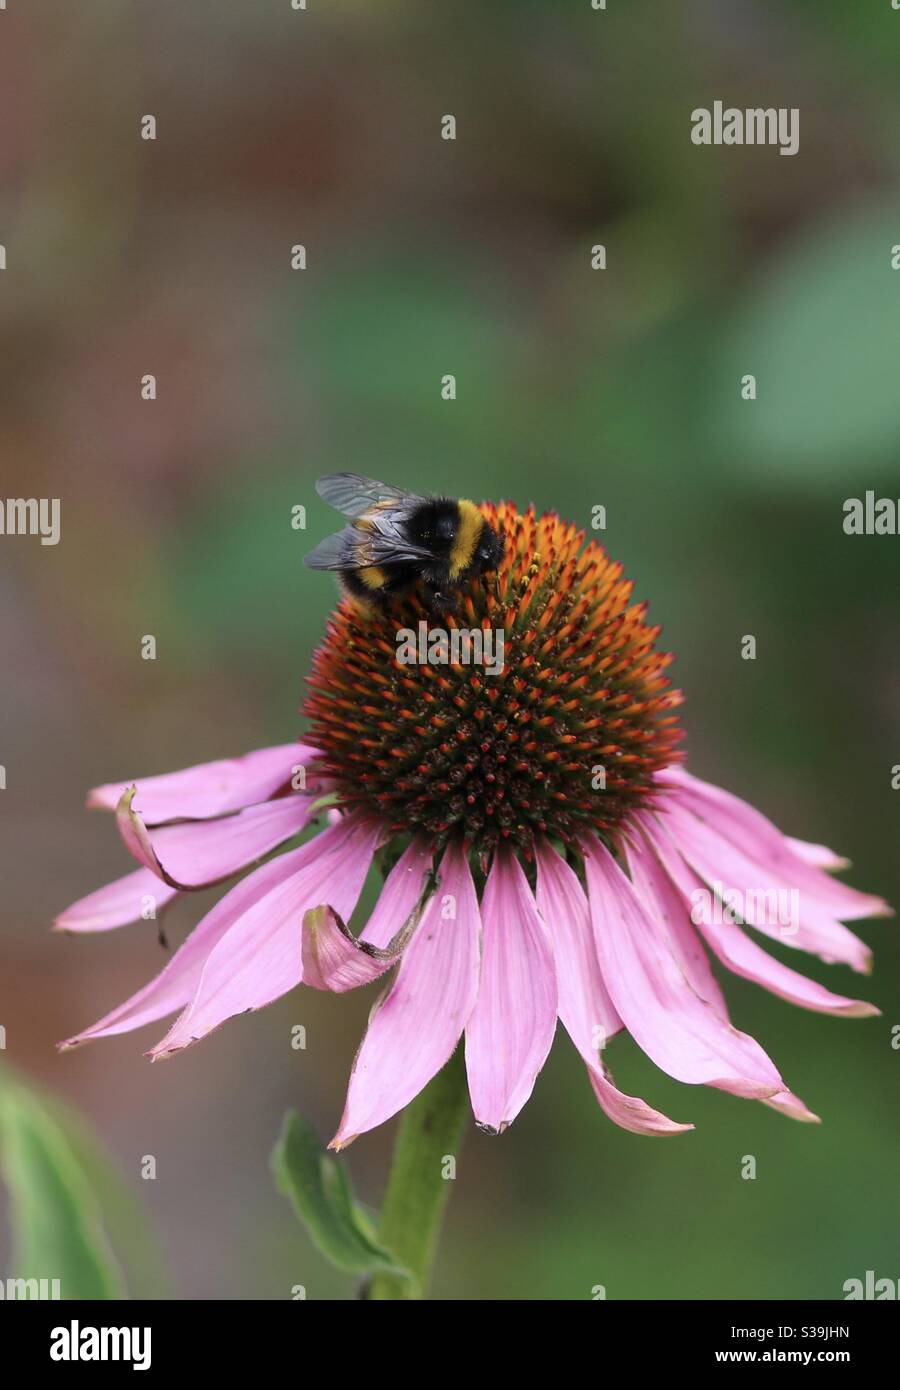 Bumblebee on an Echinacea flower at Cliveden Stock Photo